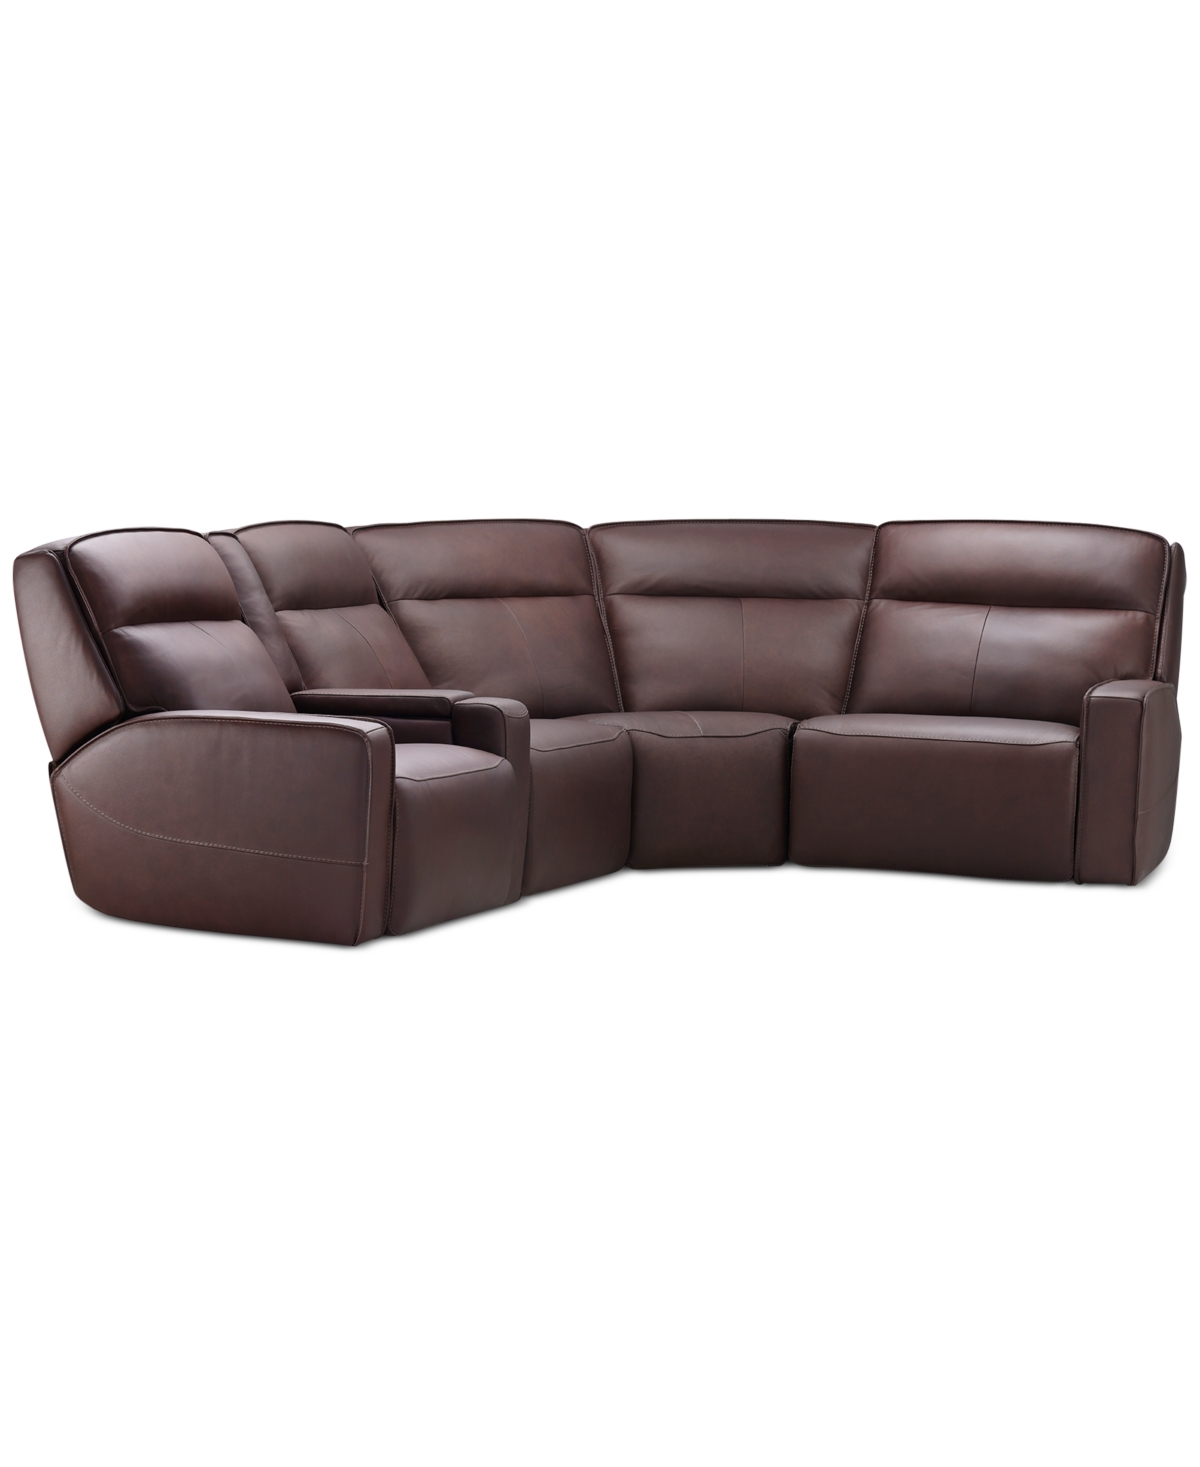 Furniture Dextan Leather 5-pc. Sectional With 2 Power Recliners And 1 Usb Console, Created For Macy's In Brown